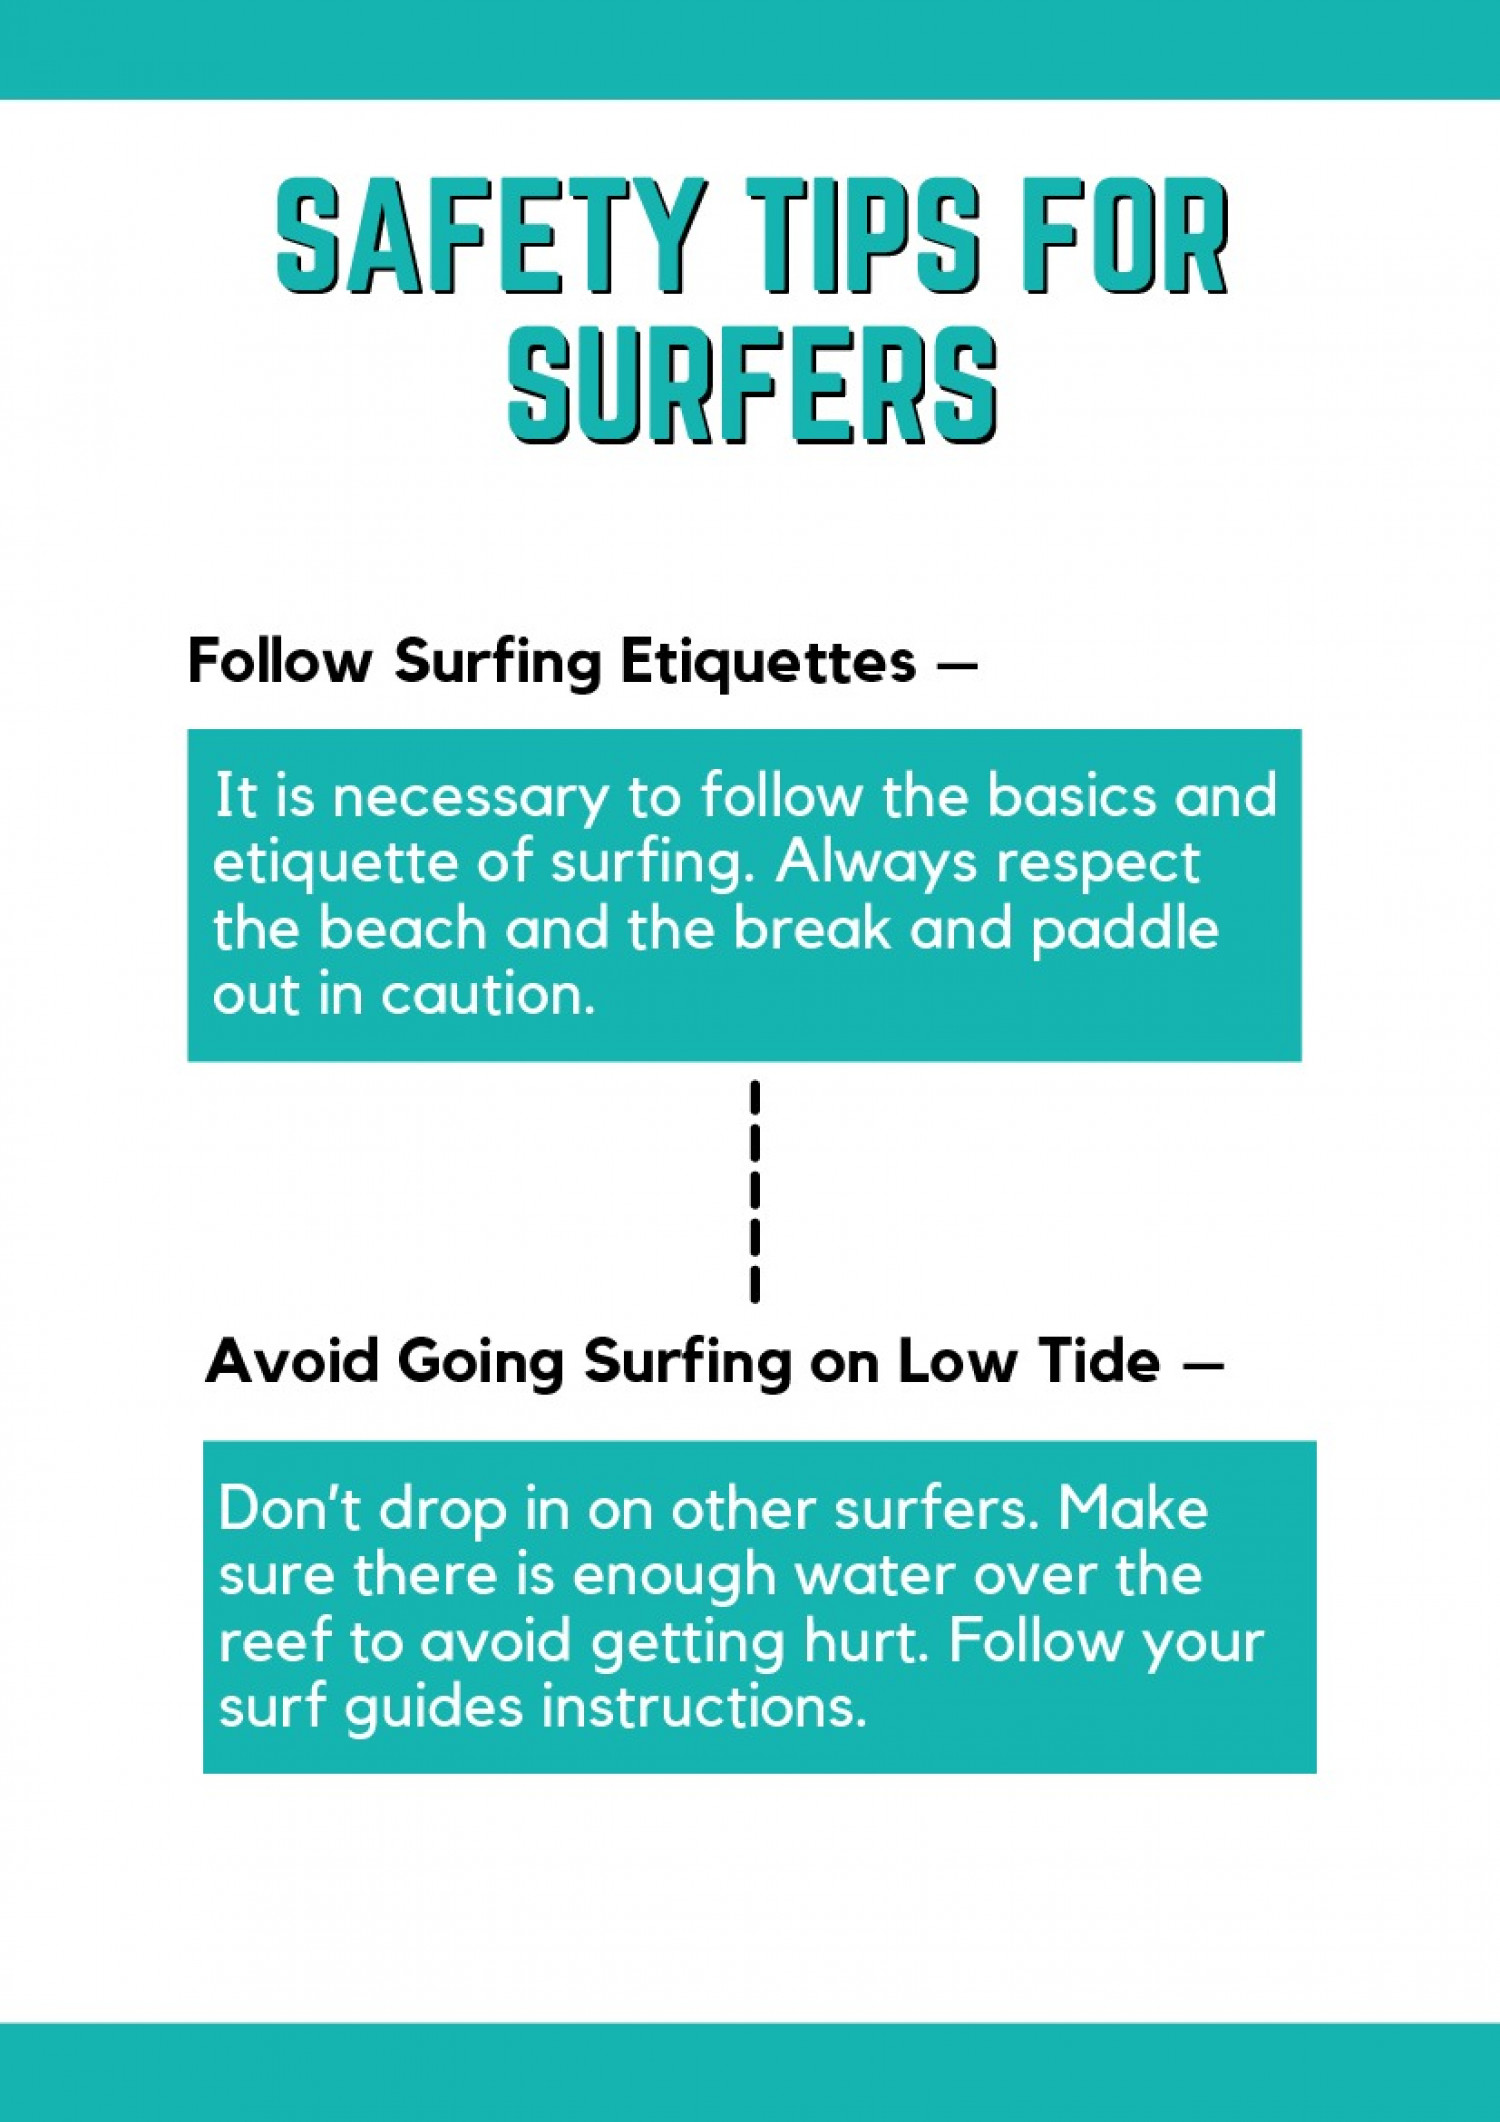 Safety Tips for Surfer Infographic